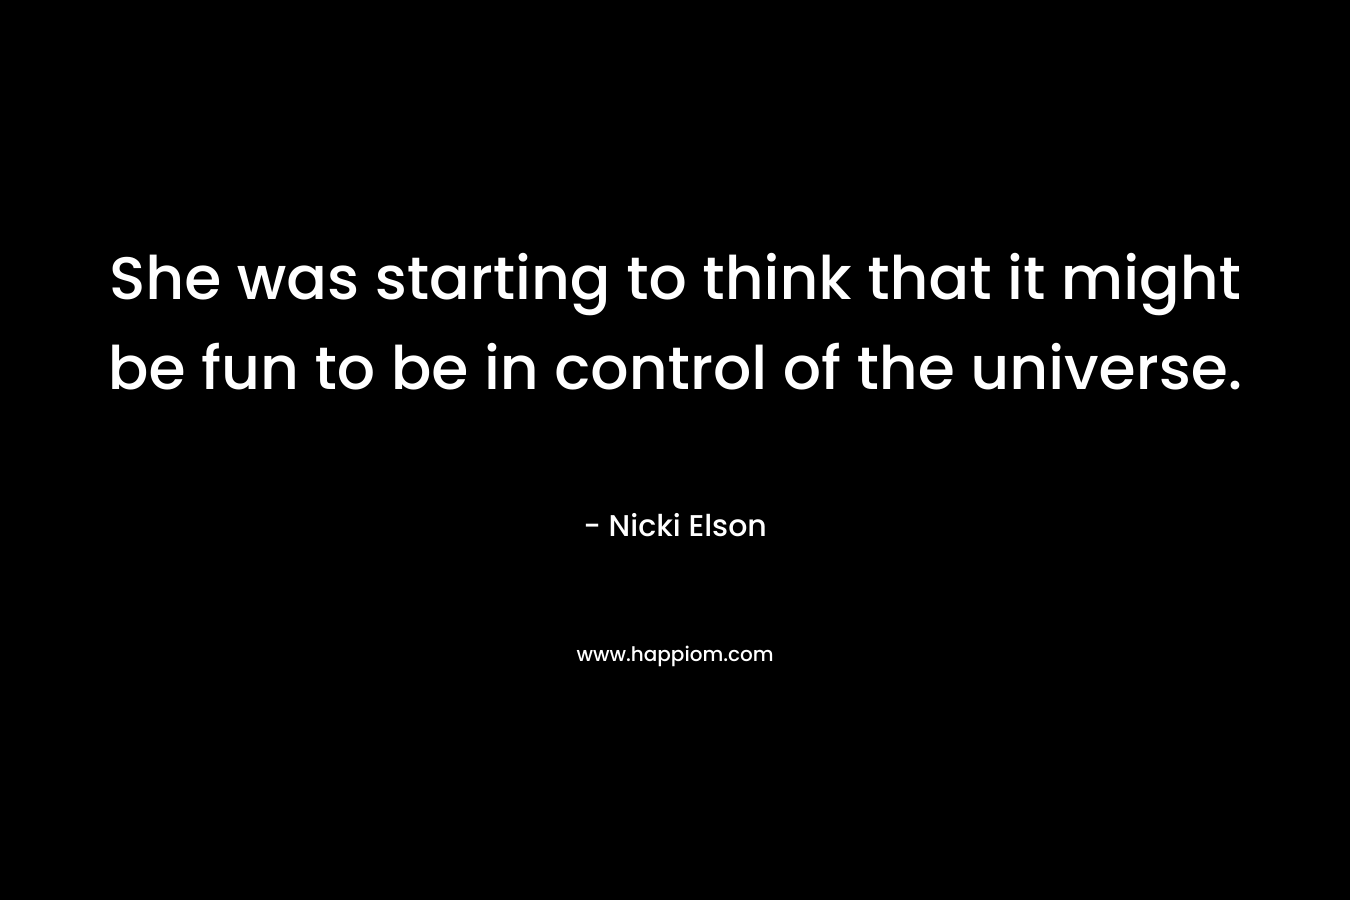 She was starting to think that it might be fun to be in control of the universe. – Nicki Elson